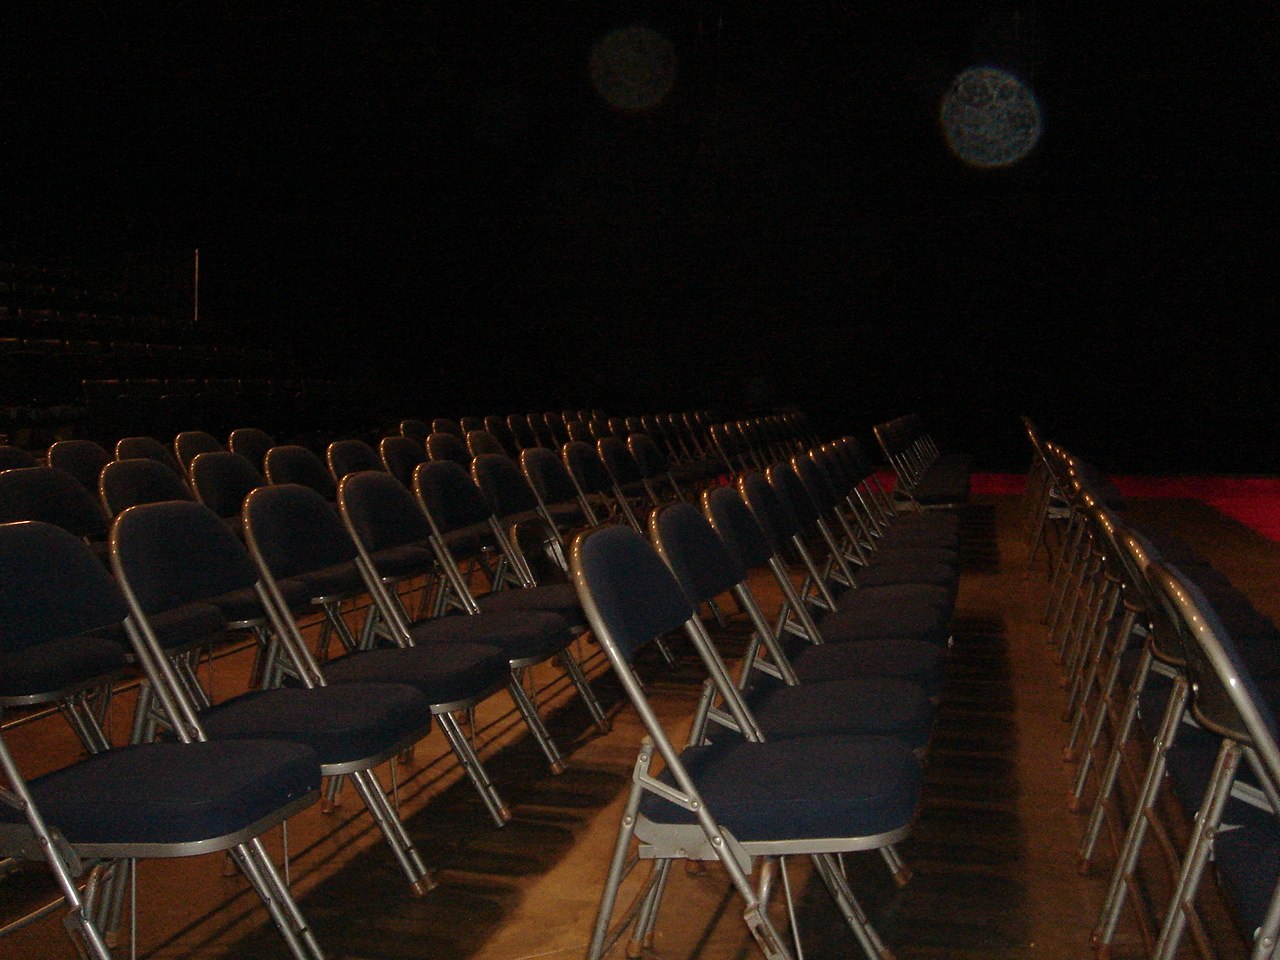 rows of chairs in an empty stage at night